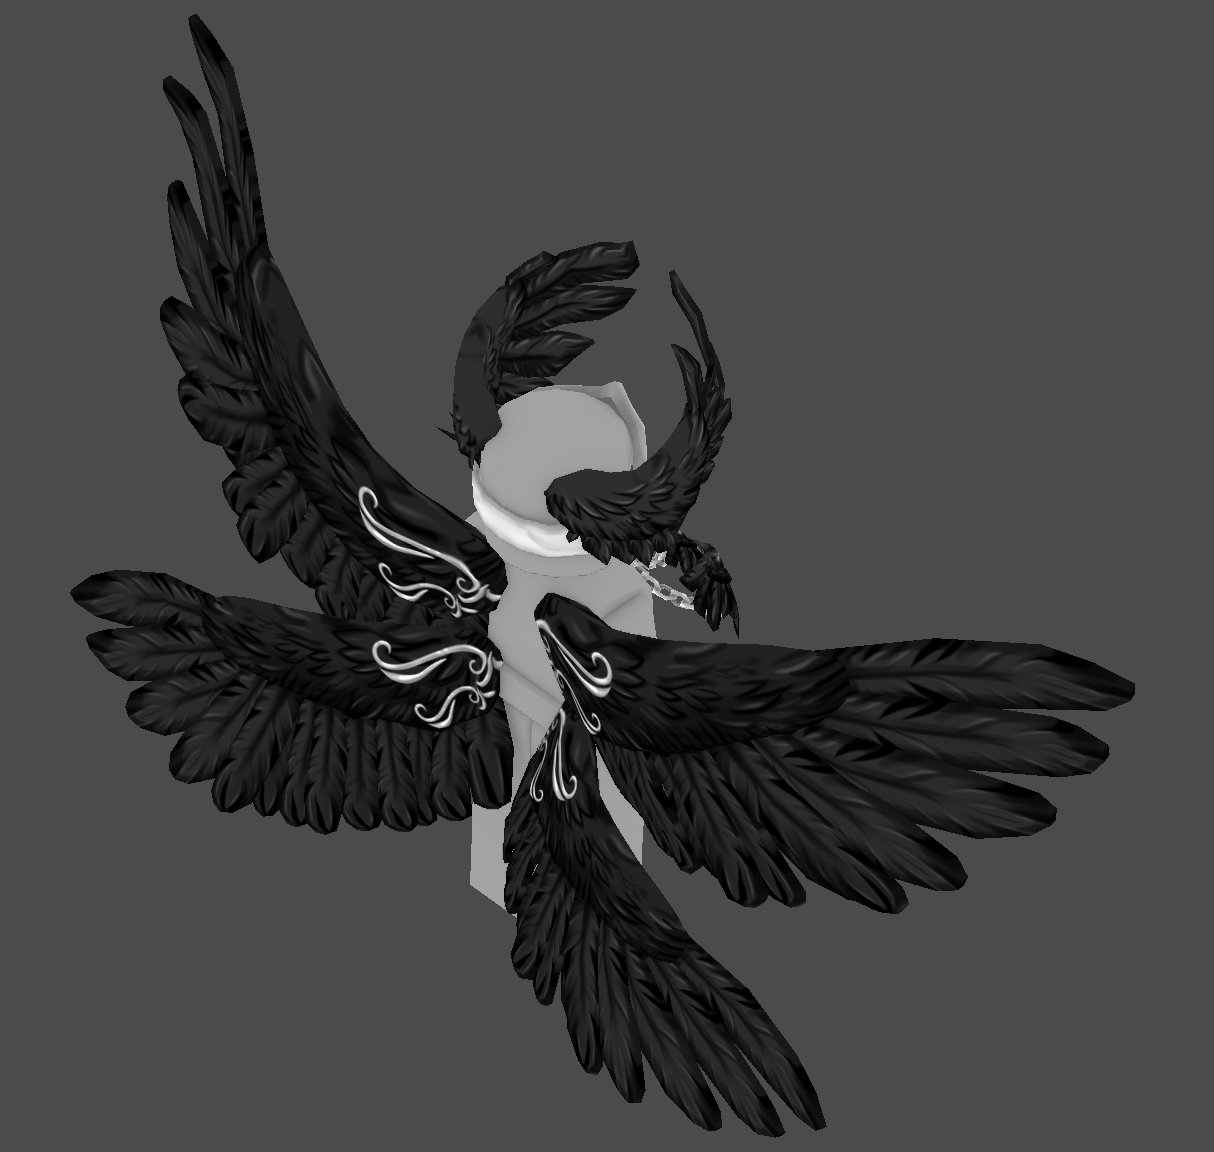 Erythia On Twitter Are You A Dark Angle Or A Light Angle Haha Just Got Done Texturing The Demon Version Of My Guardian Wings Texturing In Black Is Such A Challenge Now - erythia at roblox on twitter 2 shapes shapes provide a base